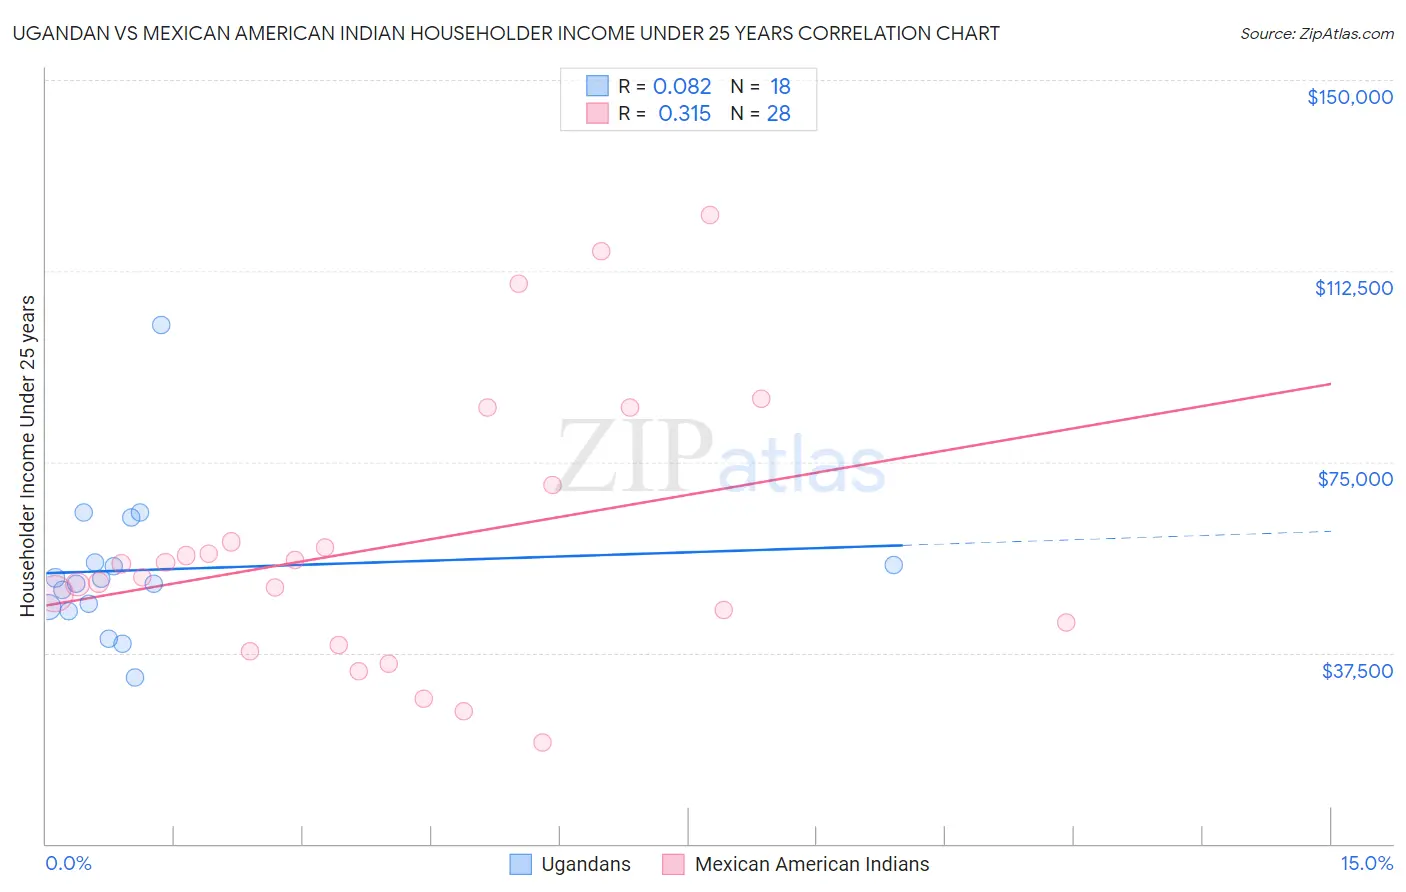 Ugandan vs Mexican American Indian Householder Income Under 25 years